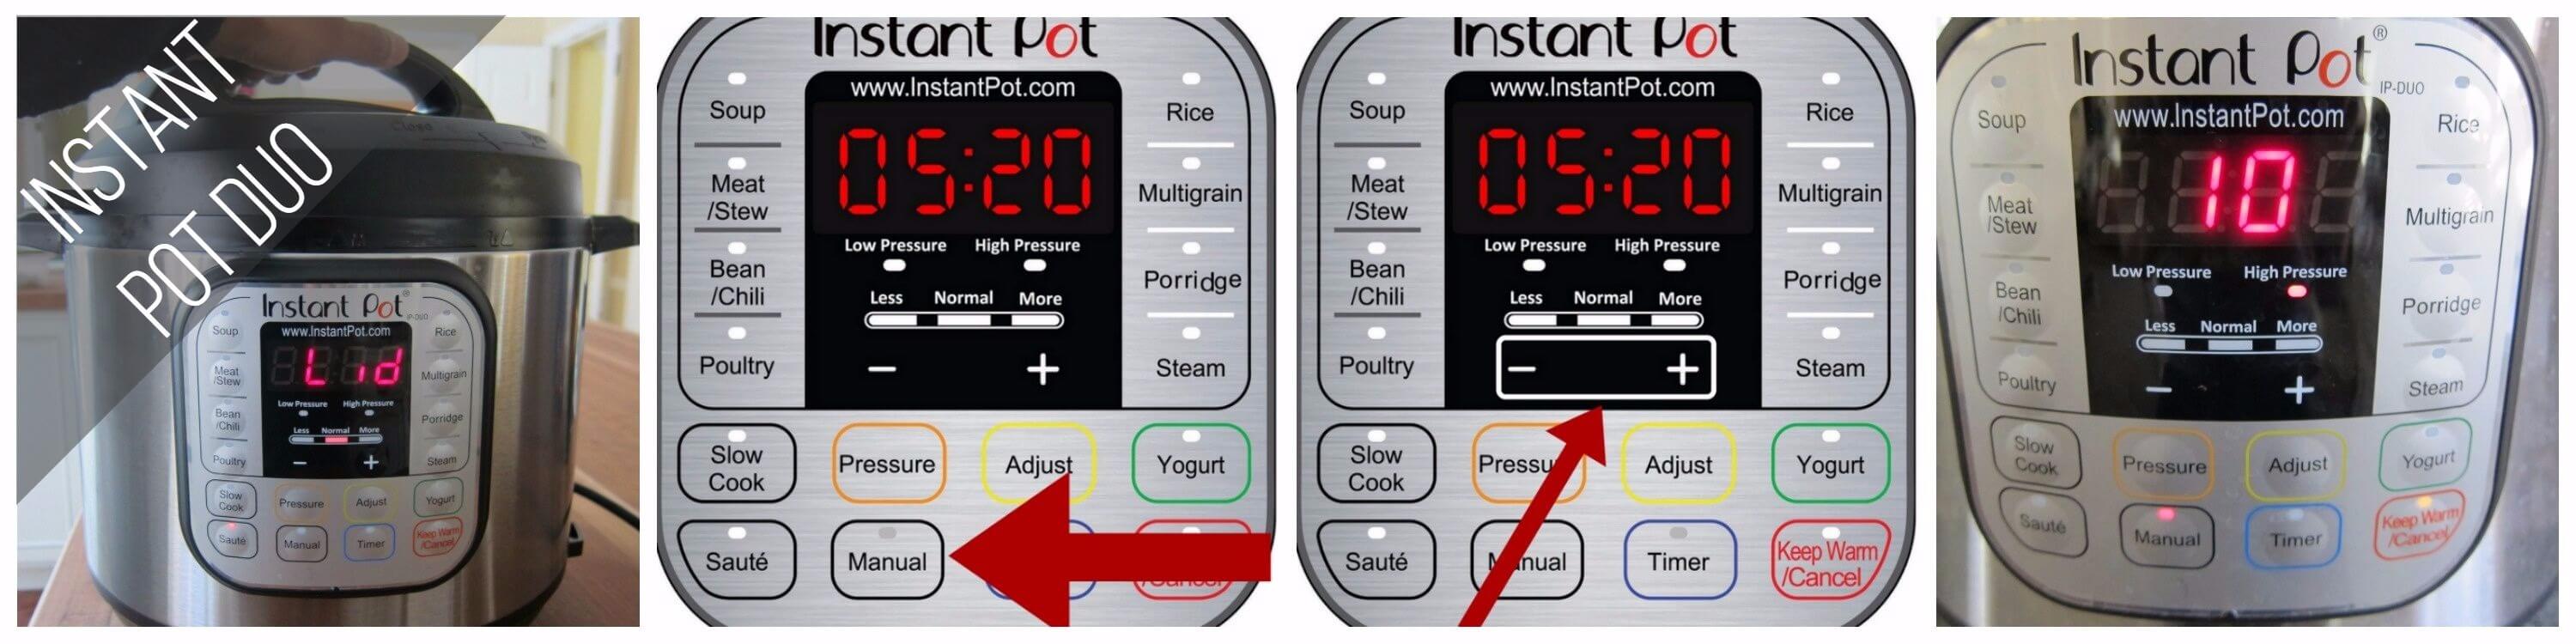 Instant Pot Duo Manual mode 10 minutes collage - close lid, press manual, press - or +, the screen shows 10- Paint the kitchen red